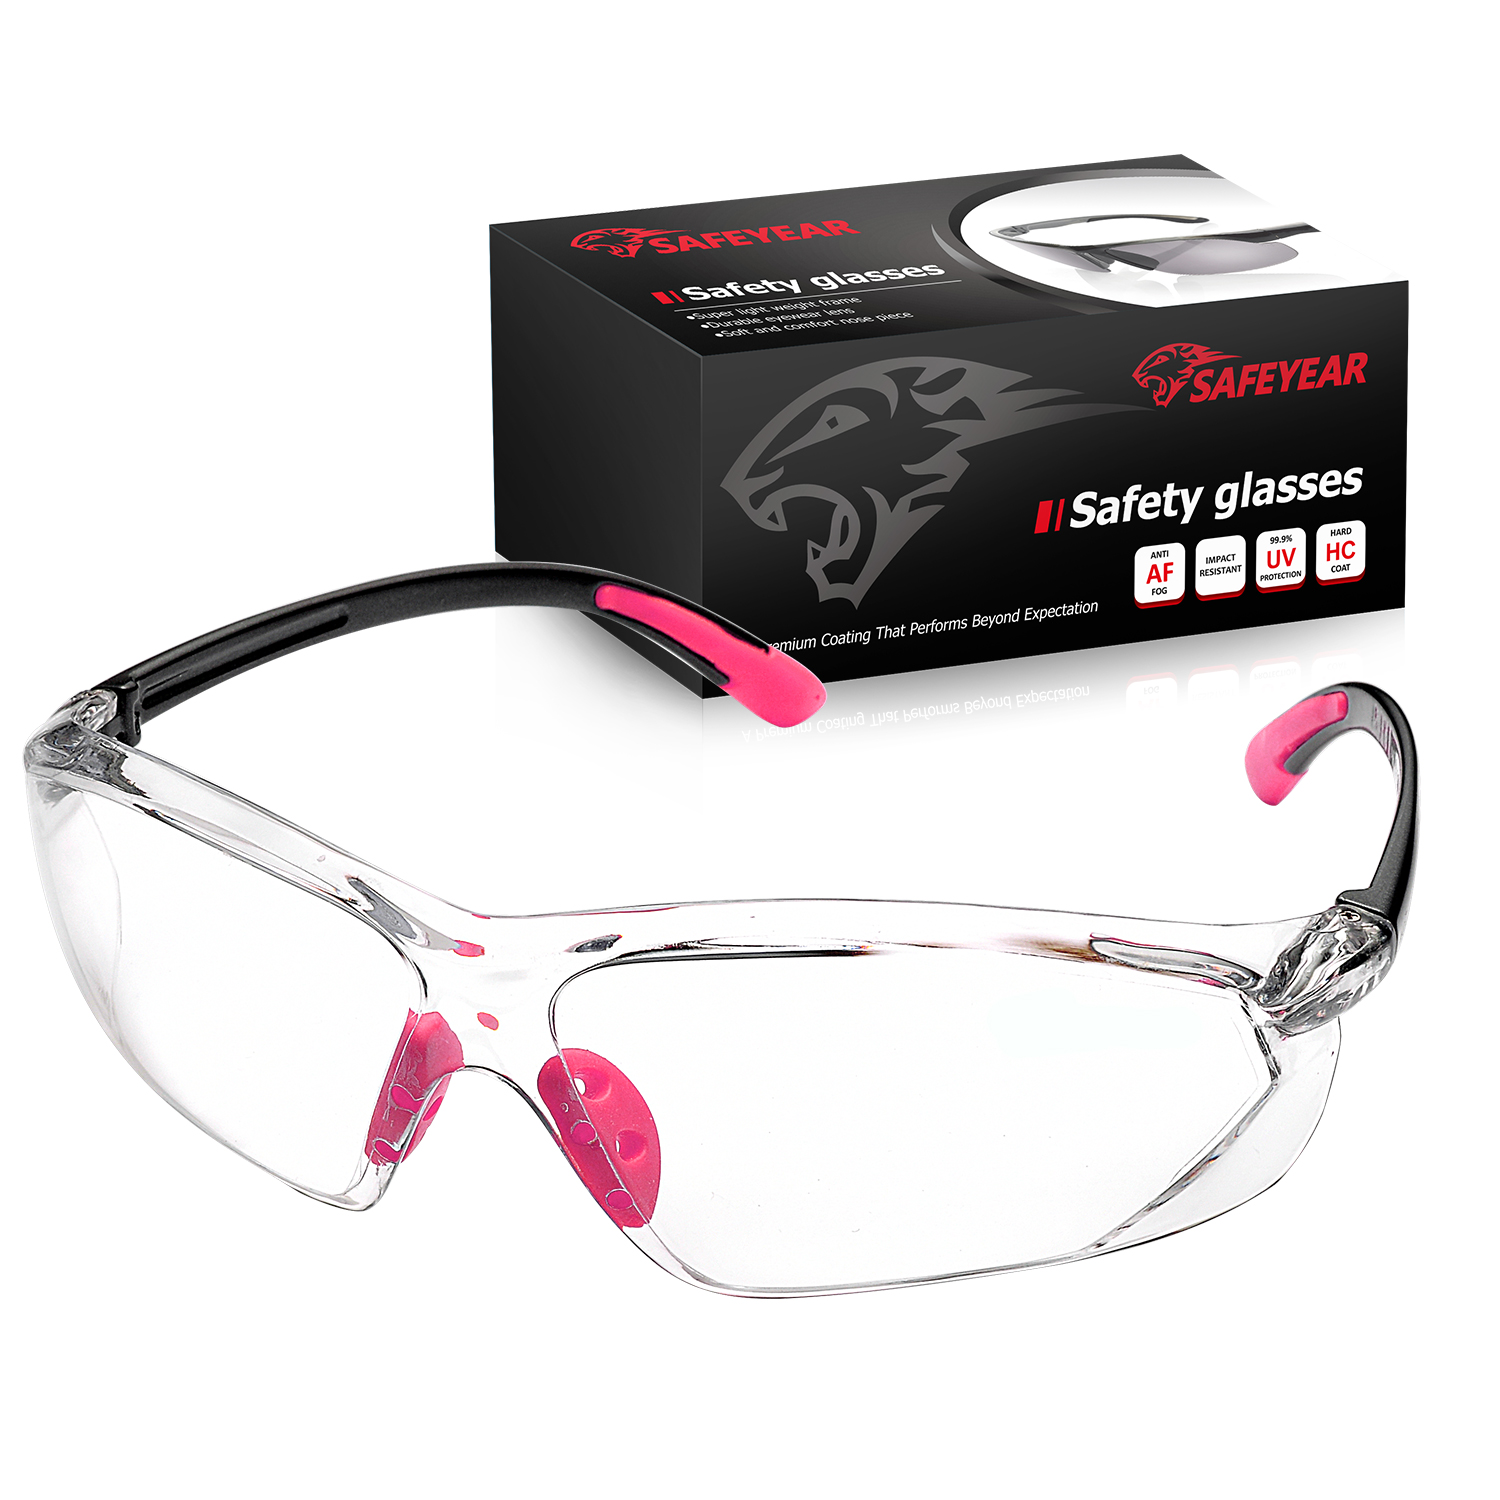 Lady Design Protective Safety Glasses SG003 Pink